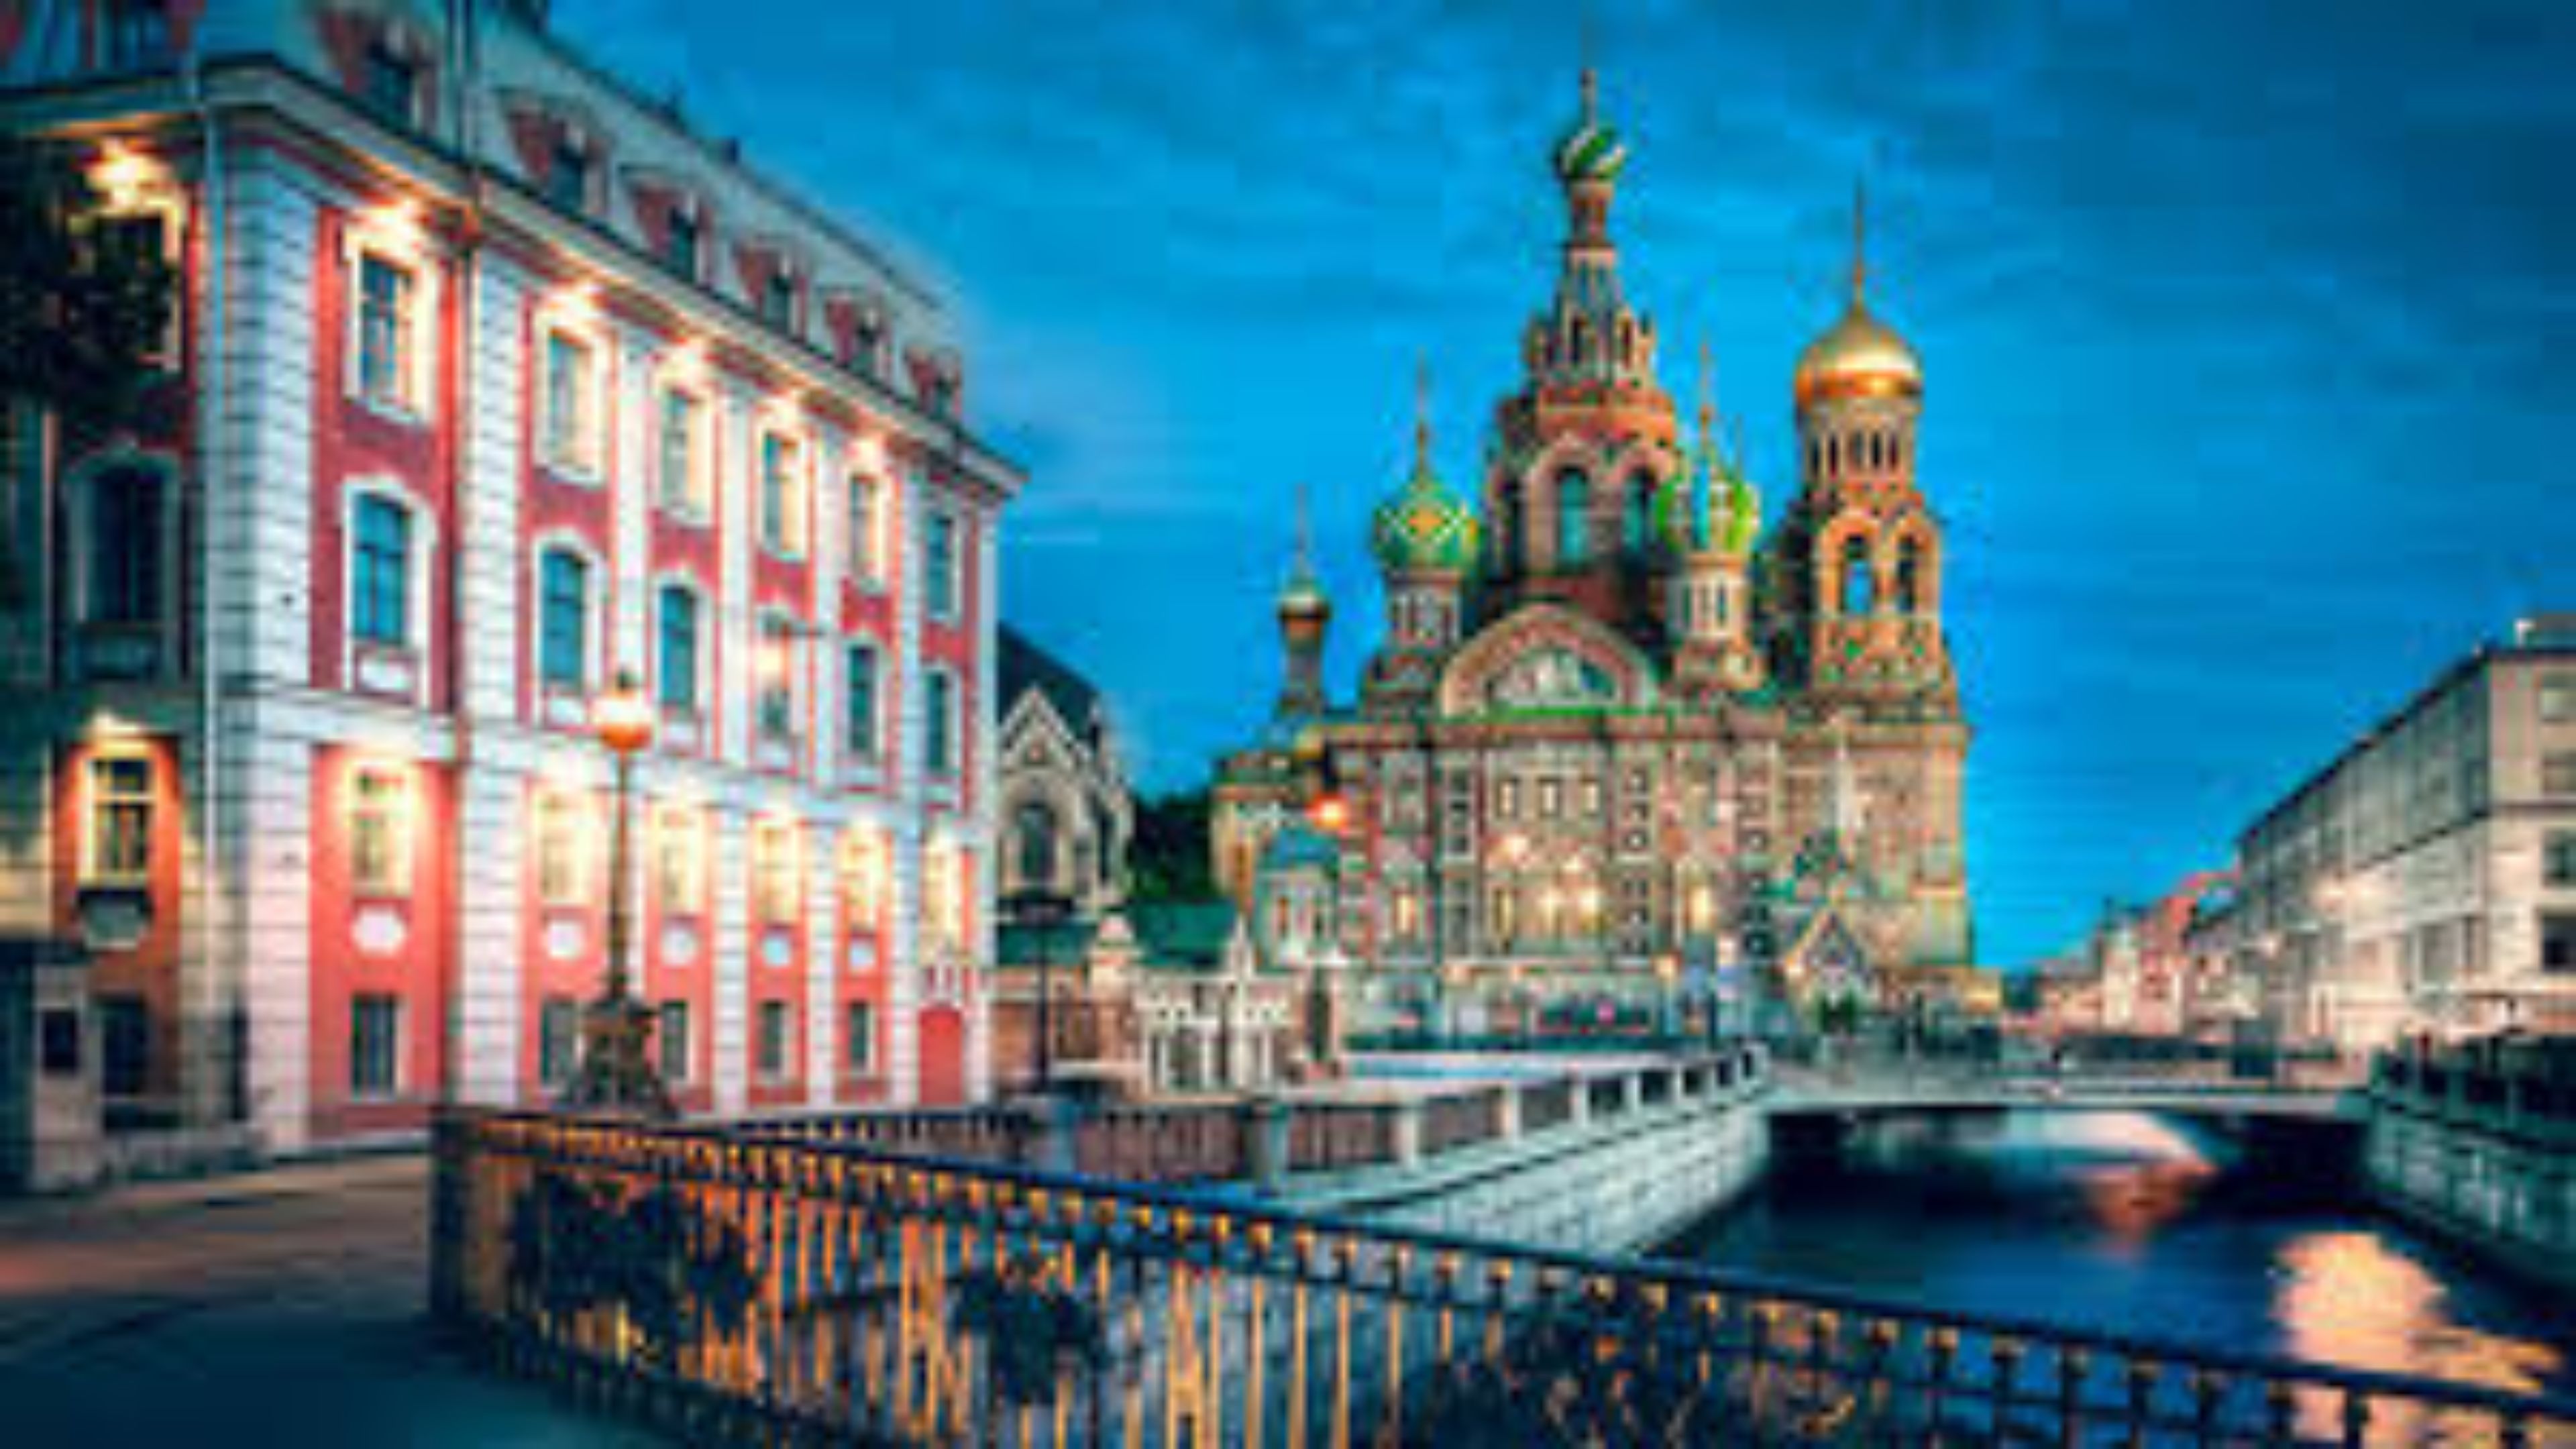 Saint Petersburg Wallpapers and Background Images - stmed.net